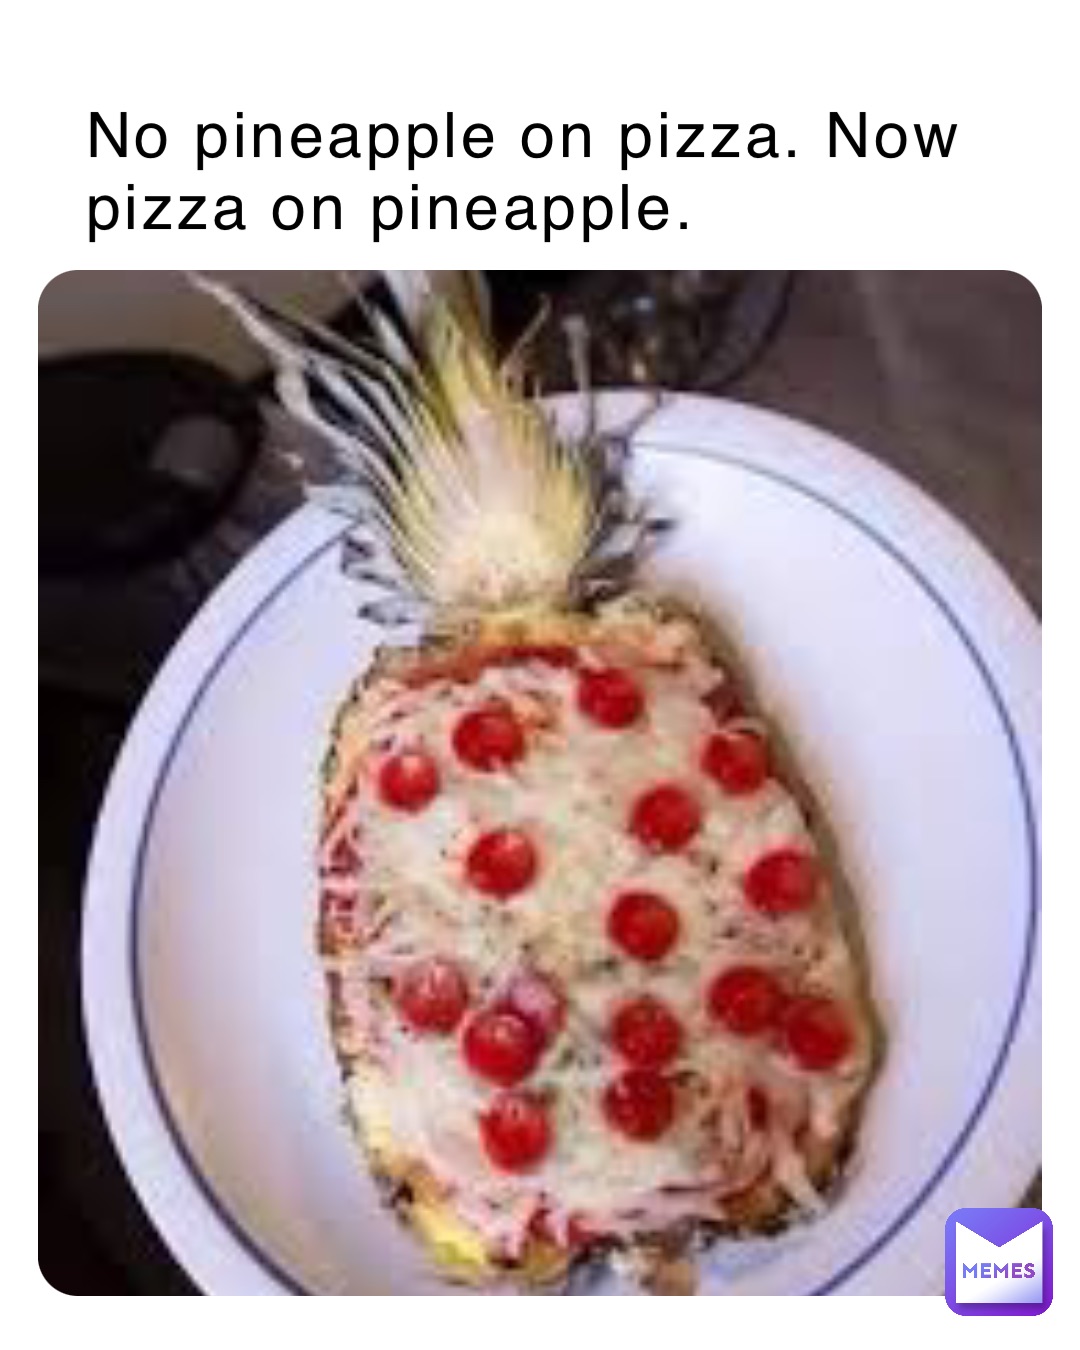 No Pineapple On Pizza Now Pizza On Pineapple 1beans1 Memes 5219